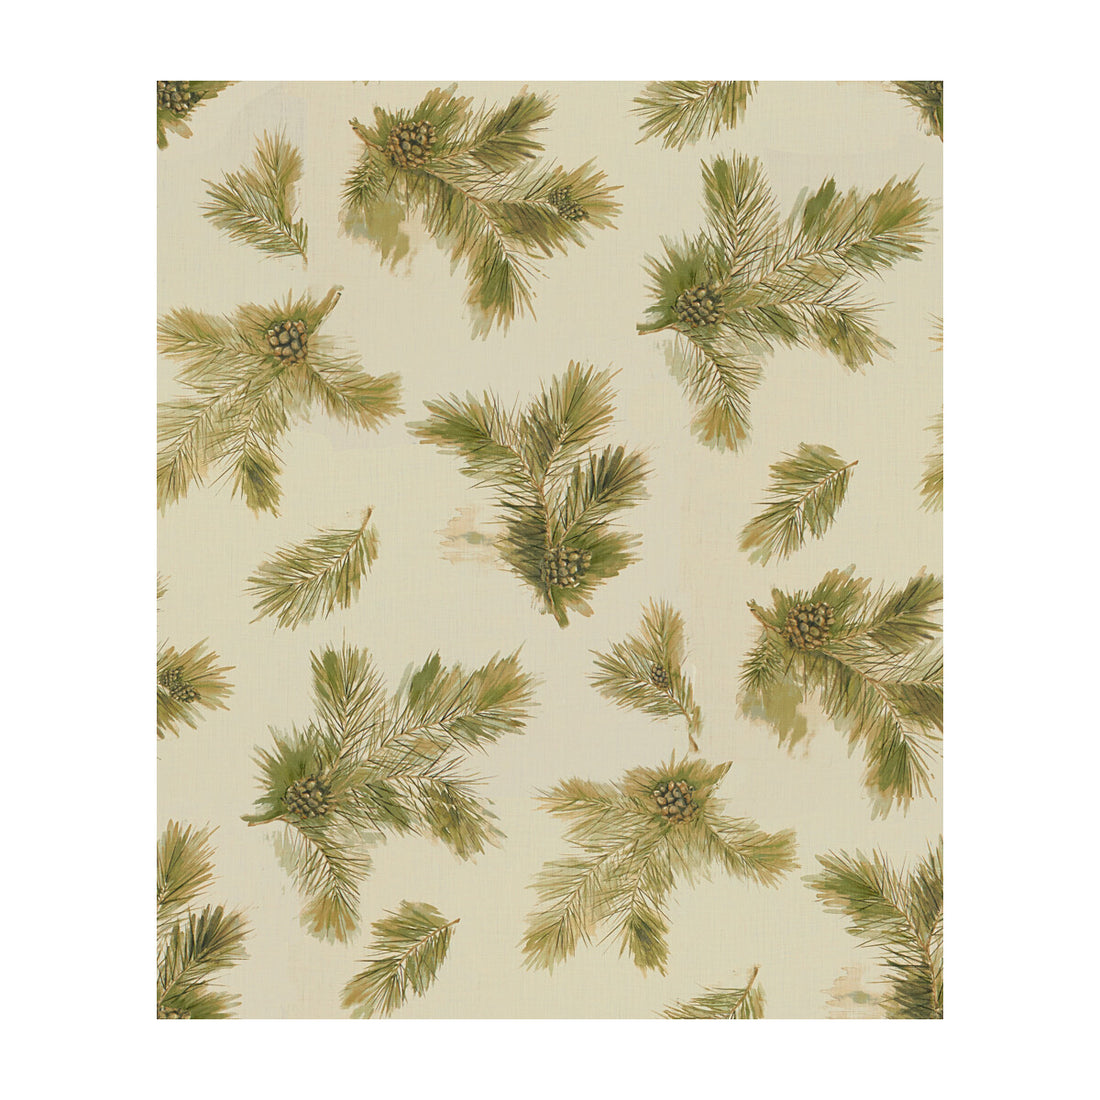 Idyllwild fabric in forest color - pattern IDYLLWILD.316.0 - by Kravet Couture in the Barbara Barry Chalet collection